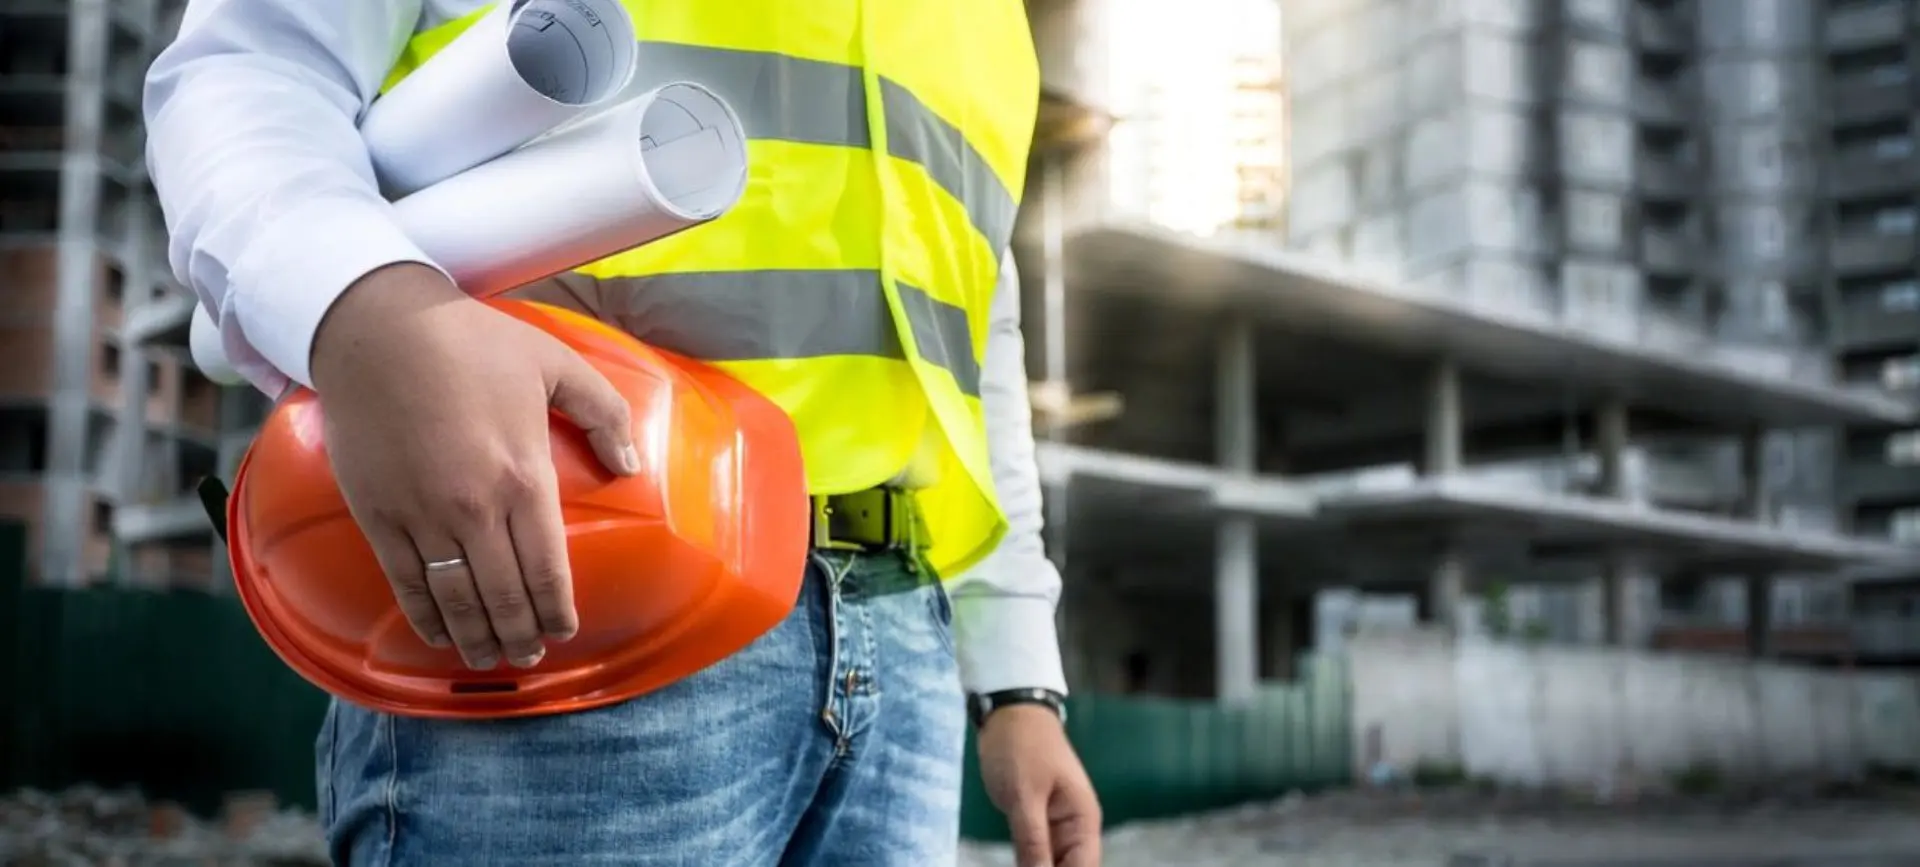 A construction worker holding an orange helmet and some papers.